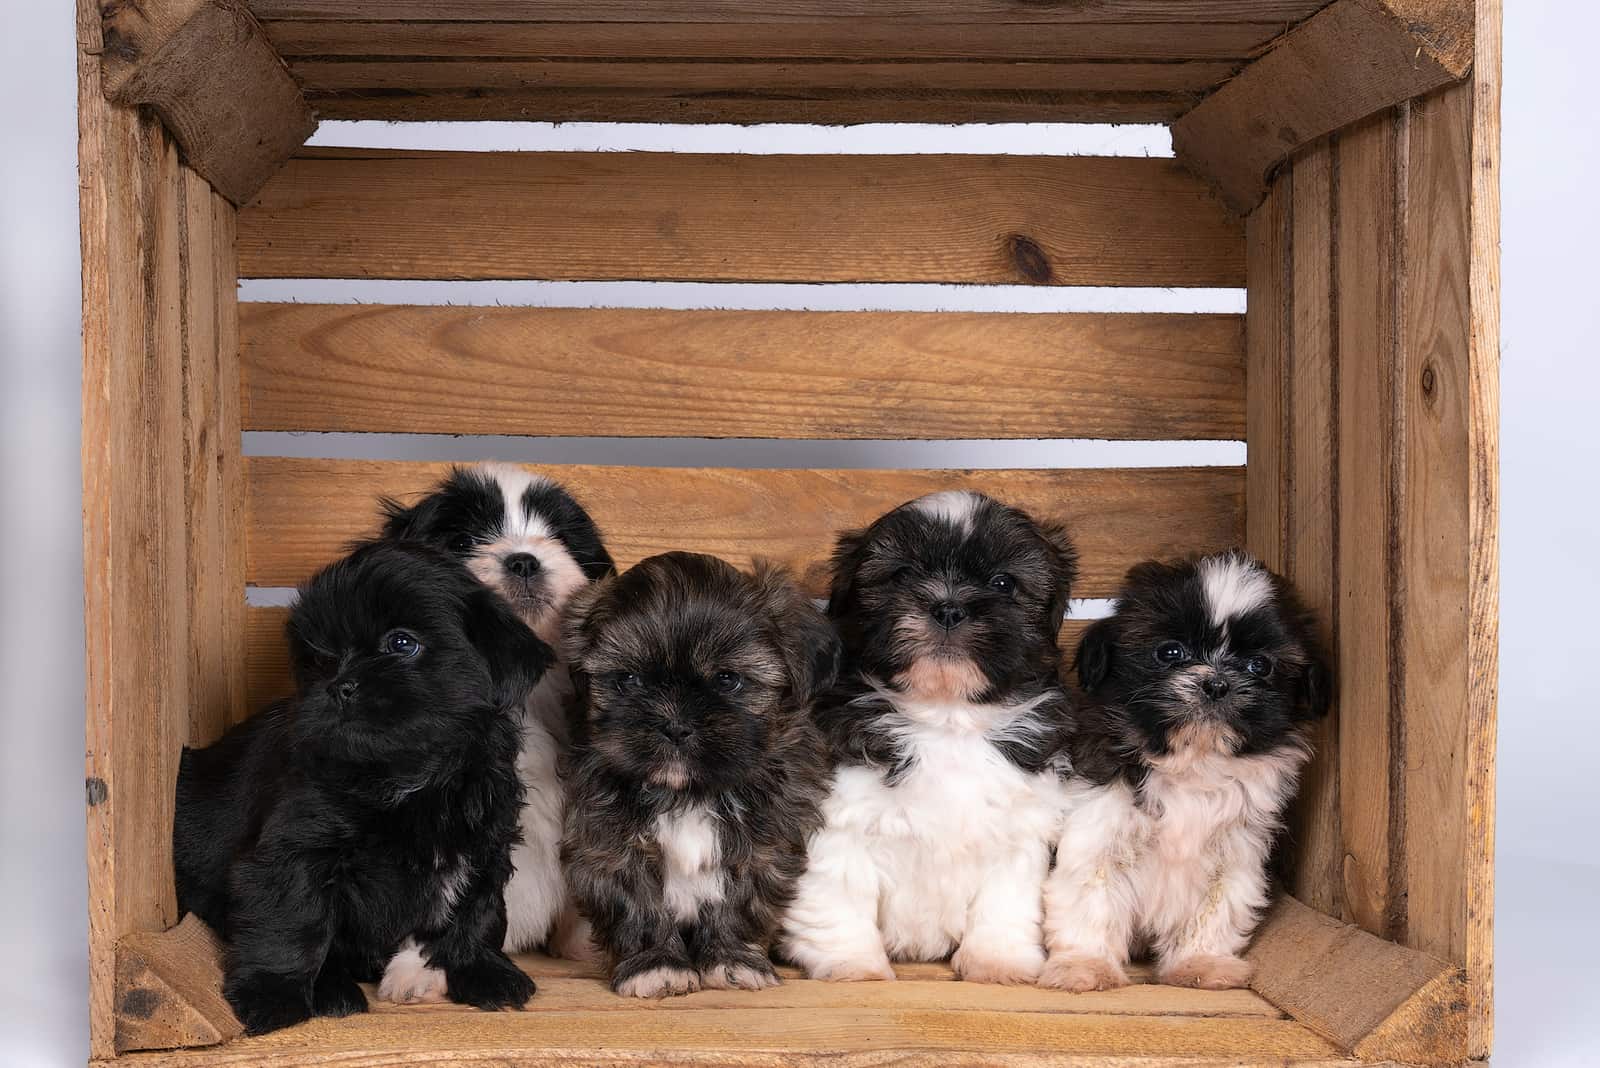 shih tzu puppies sitting together in a wooden crate